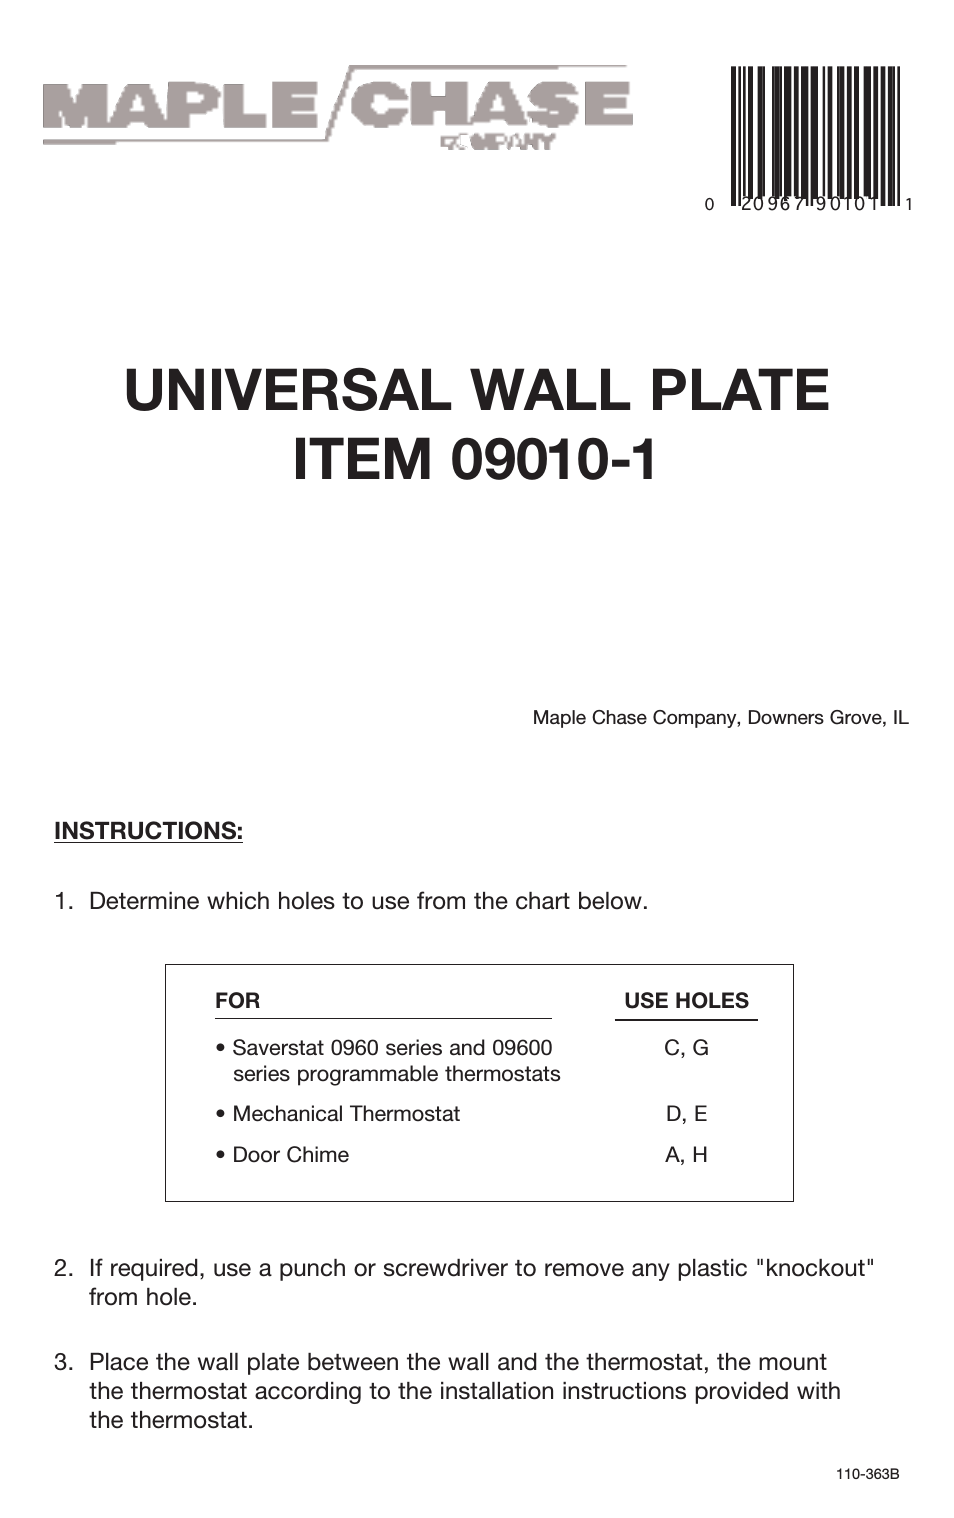 WALL PLATE 09010-1